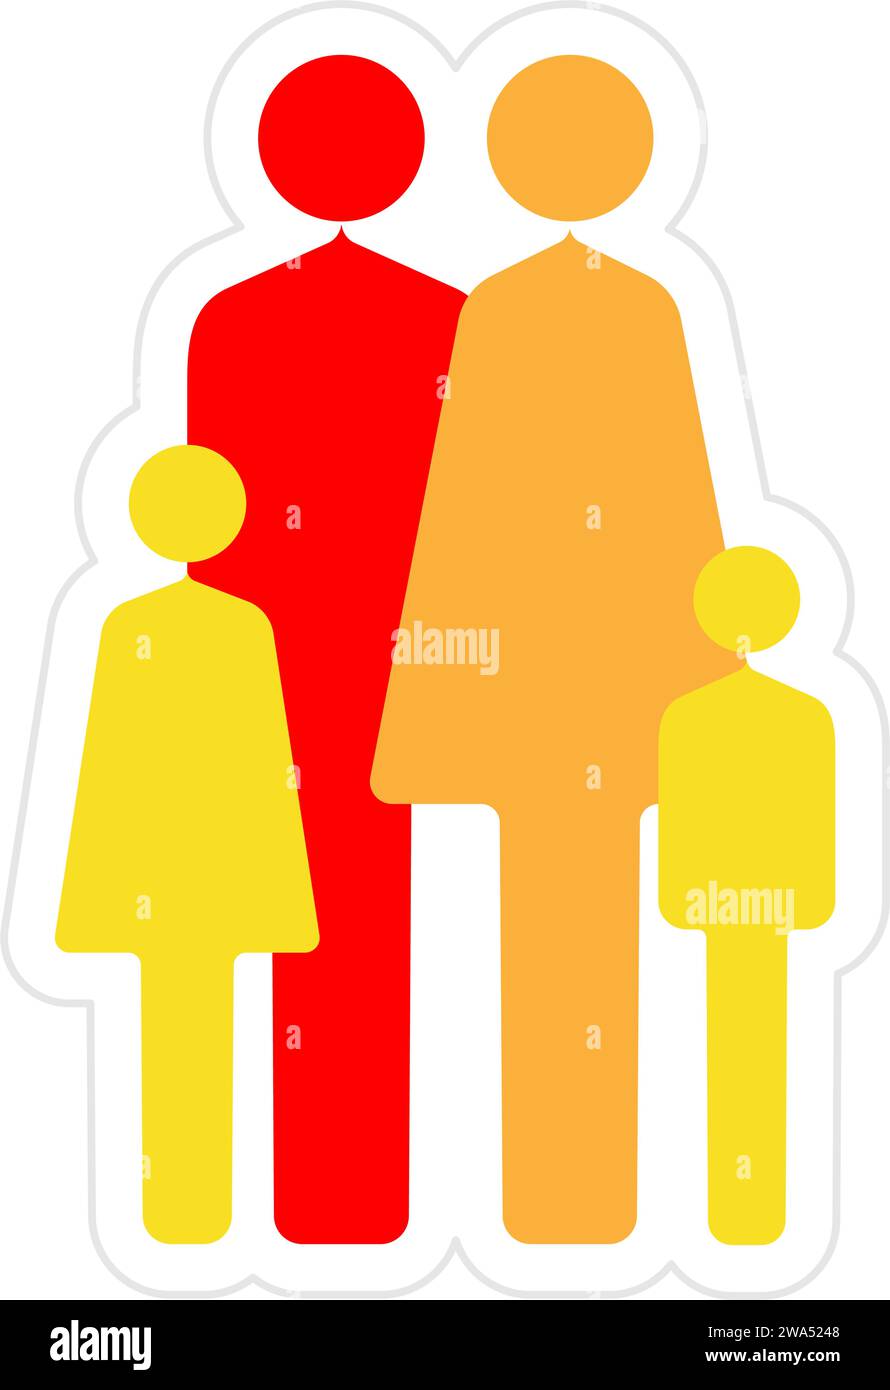 Human Family icon symbol. Colorful vector illustration Stock Vector